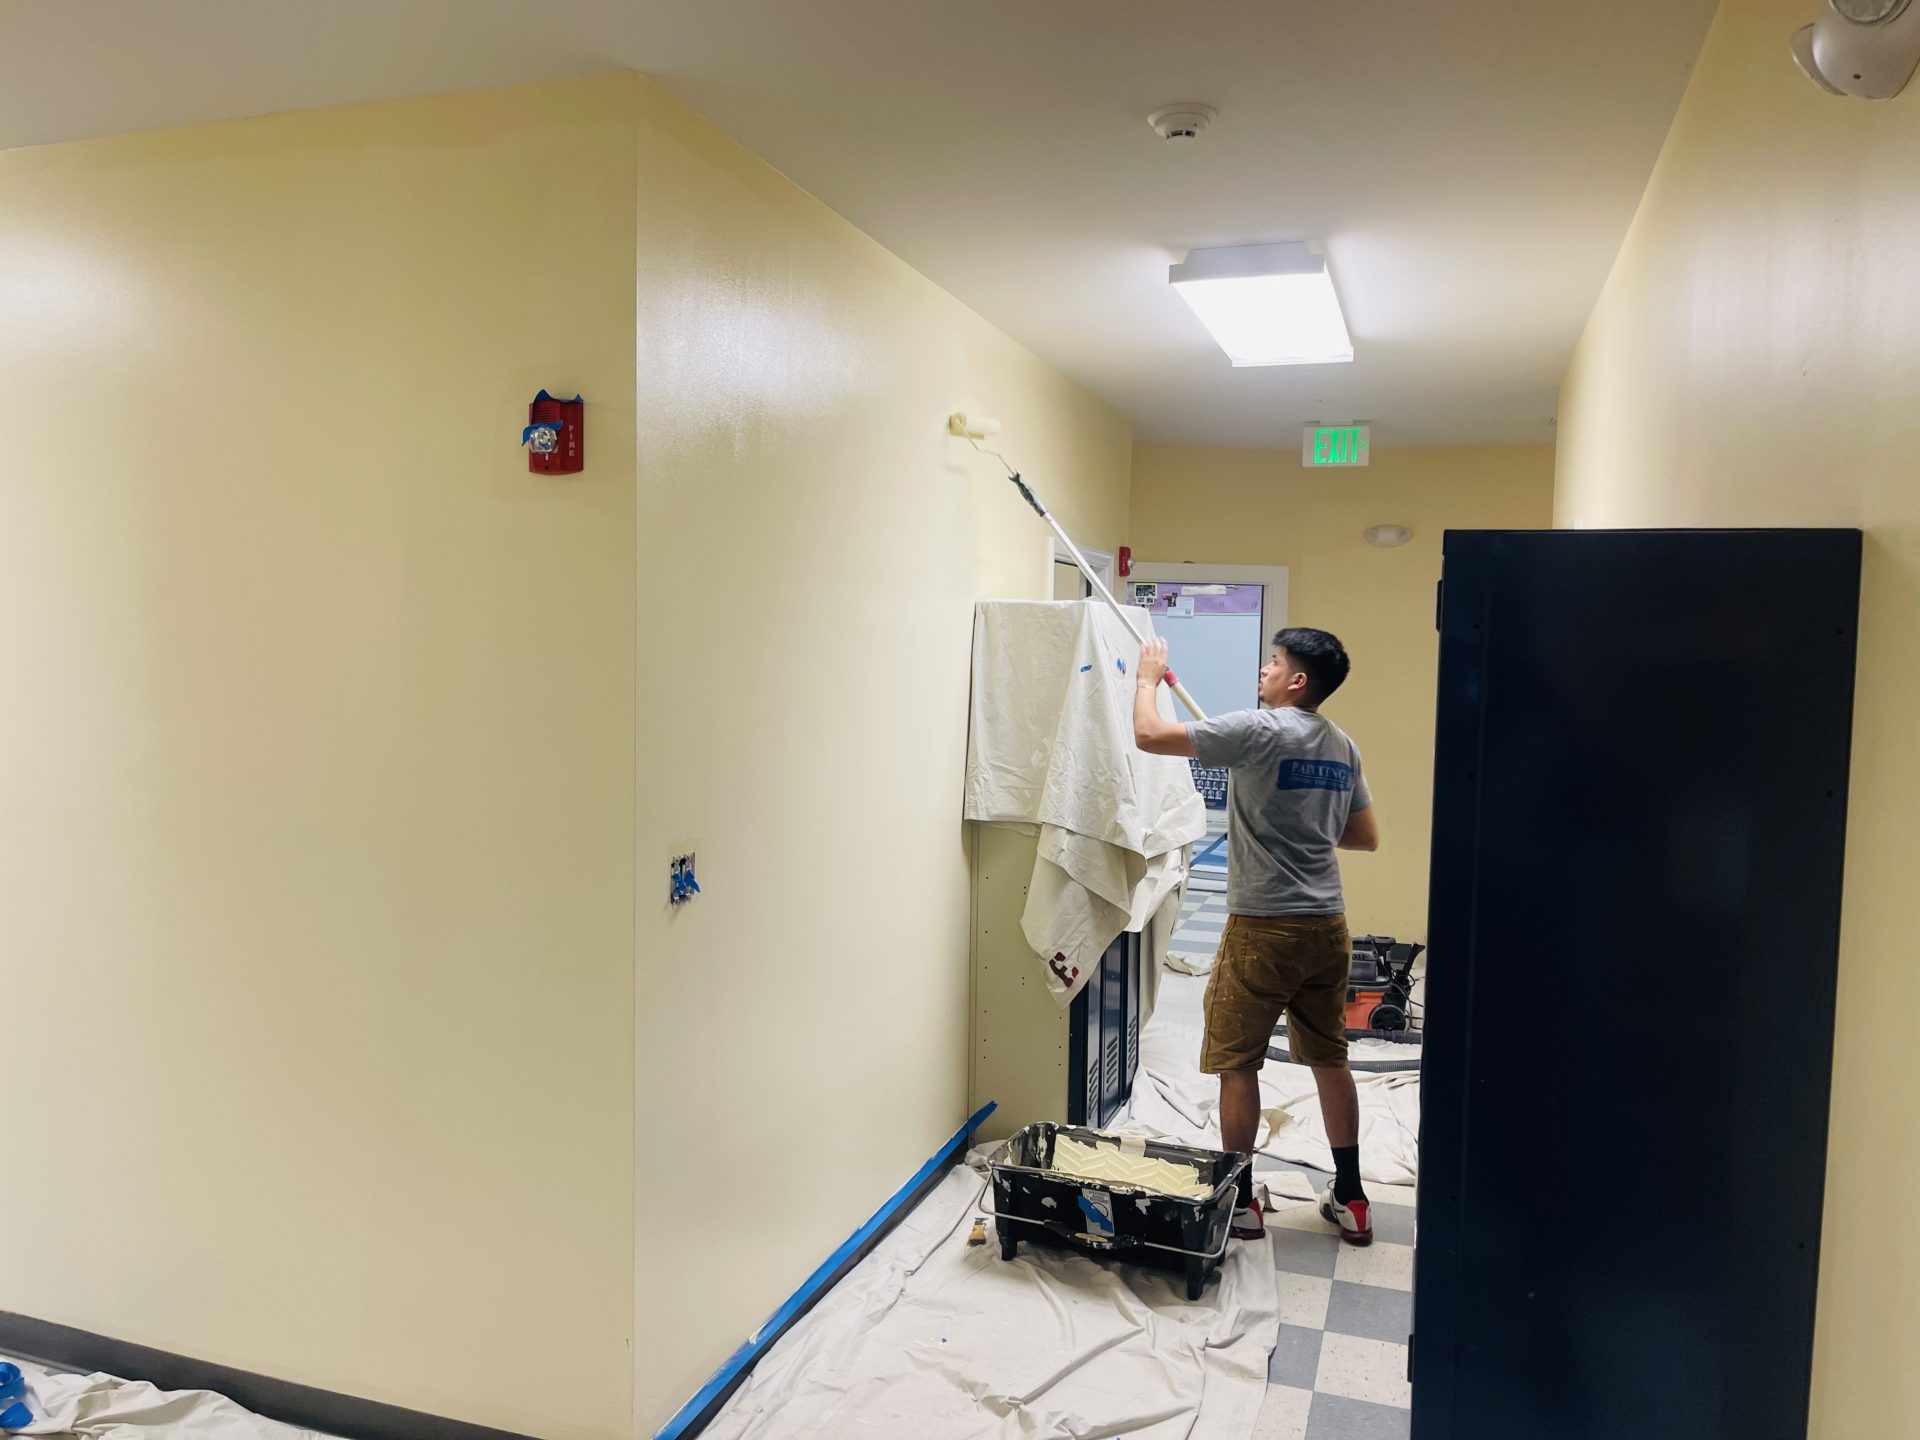 Professional painter revitalizing a school environment, creating a fresh and inviting atmosphere